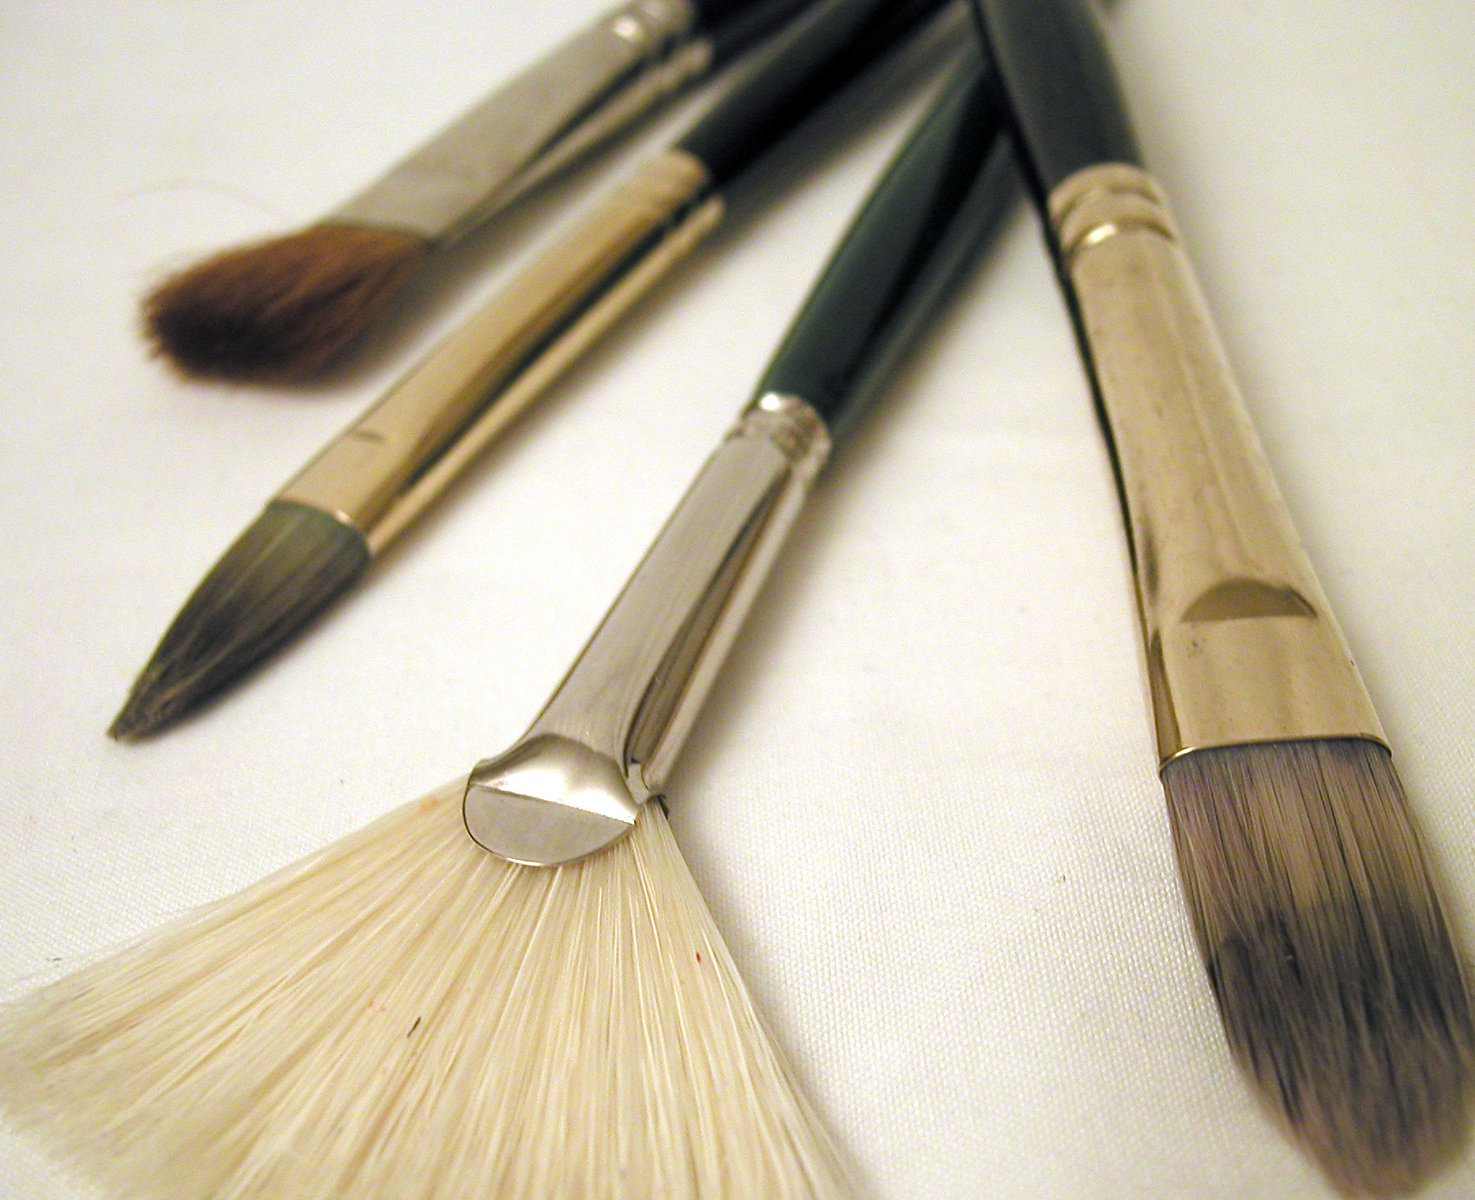 there are five different brushes on the white surface